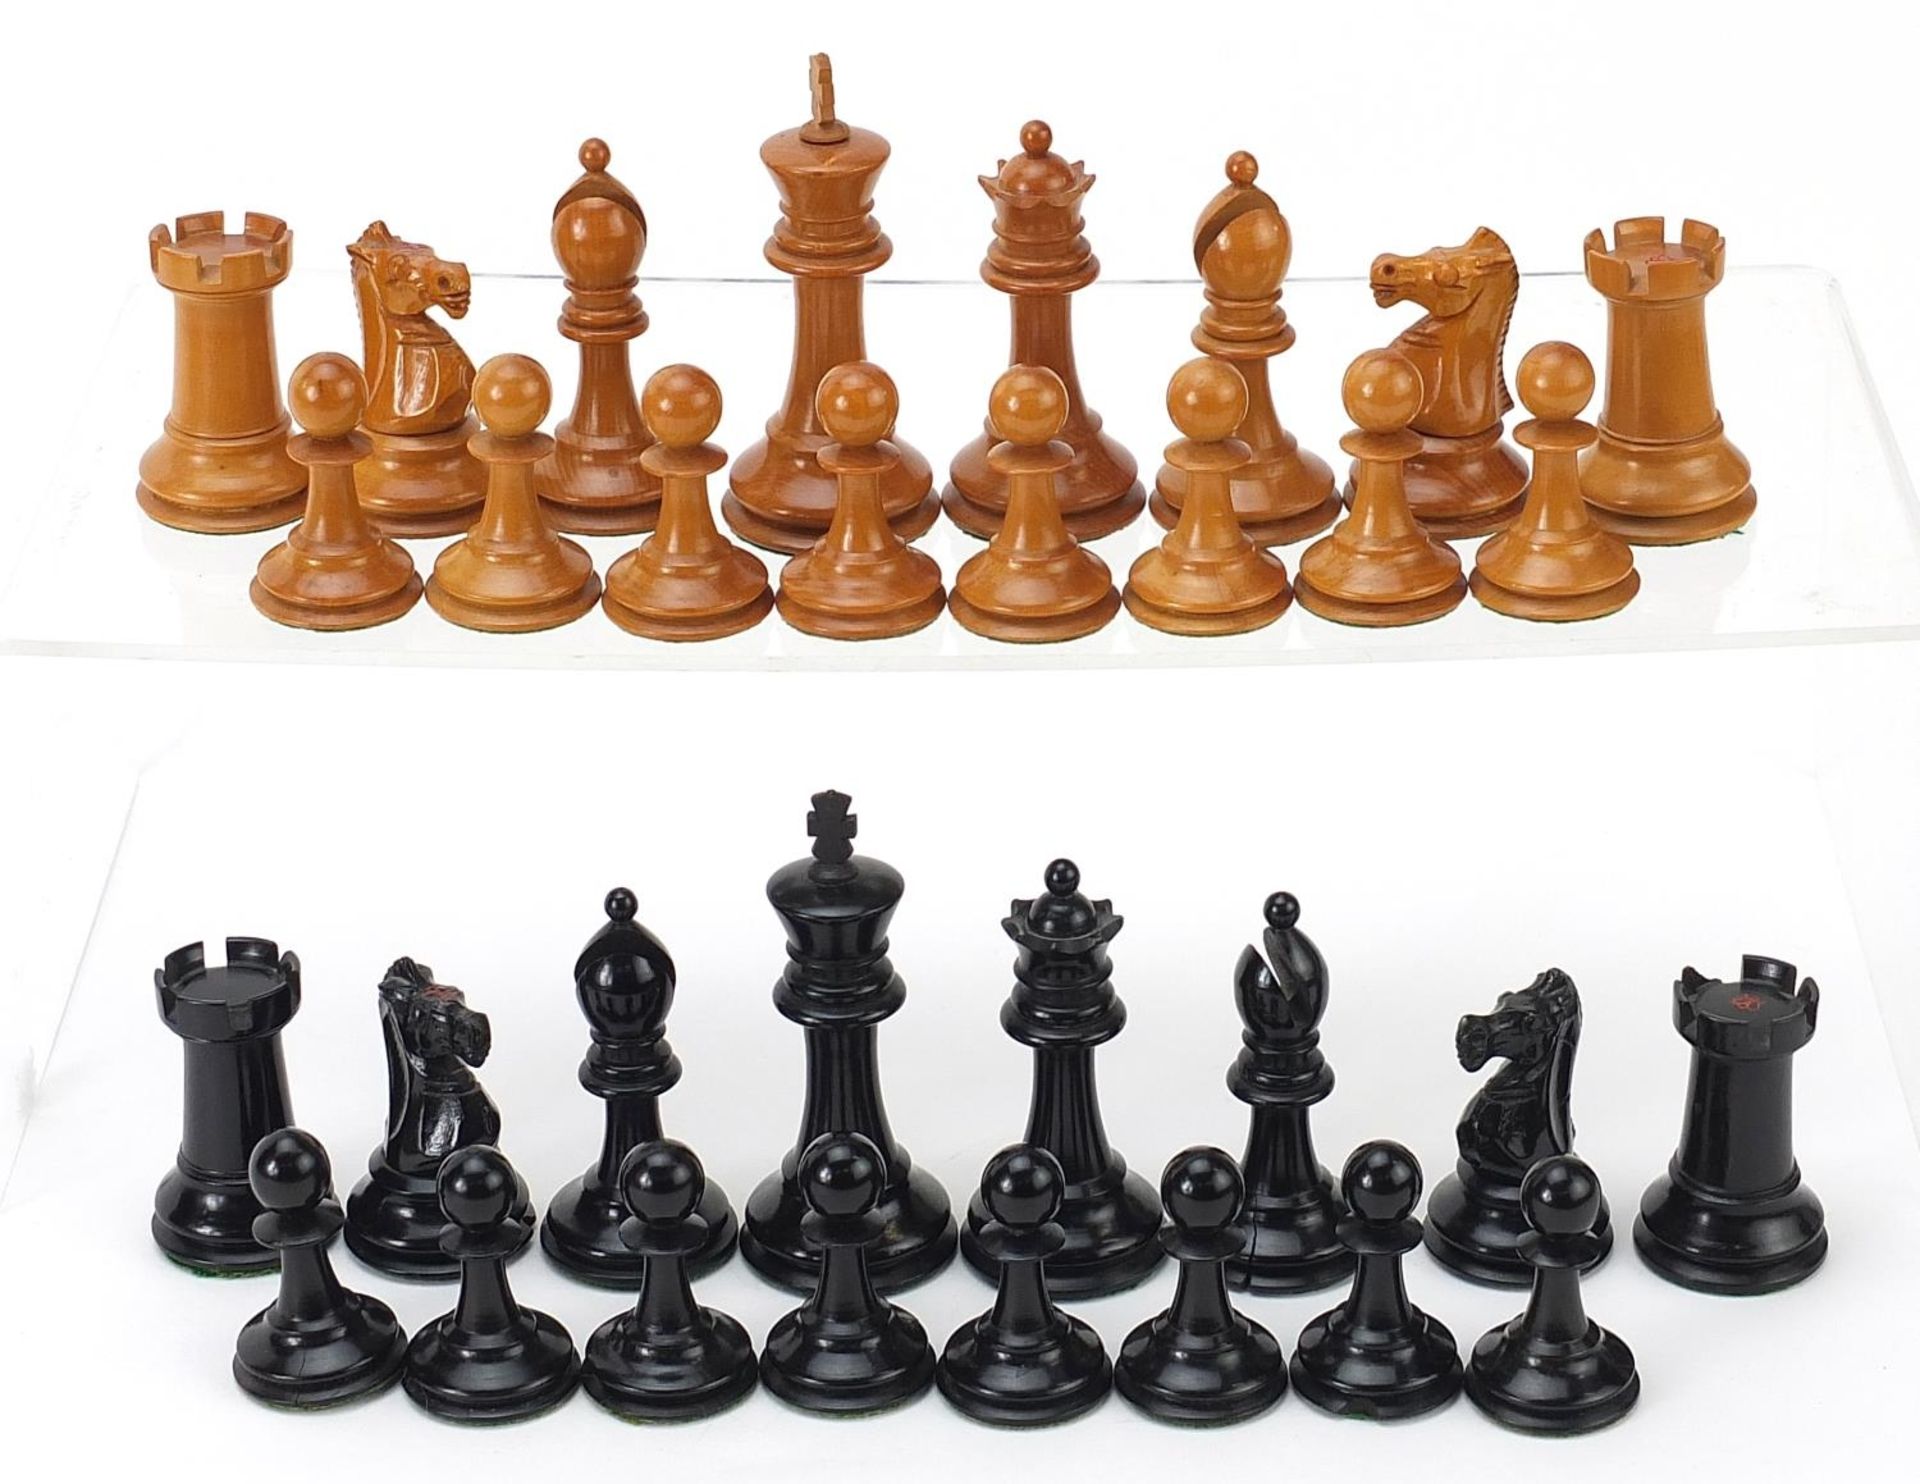 Ebony and boxwood Staunton pattern chess set with folding board, the largest pieces each 8cm high - Image 2 of 7